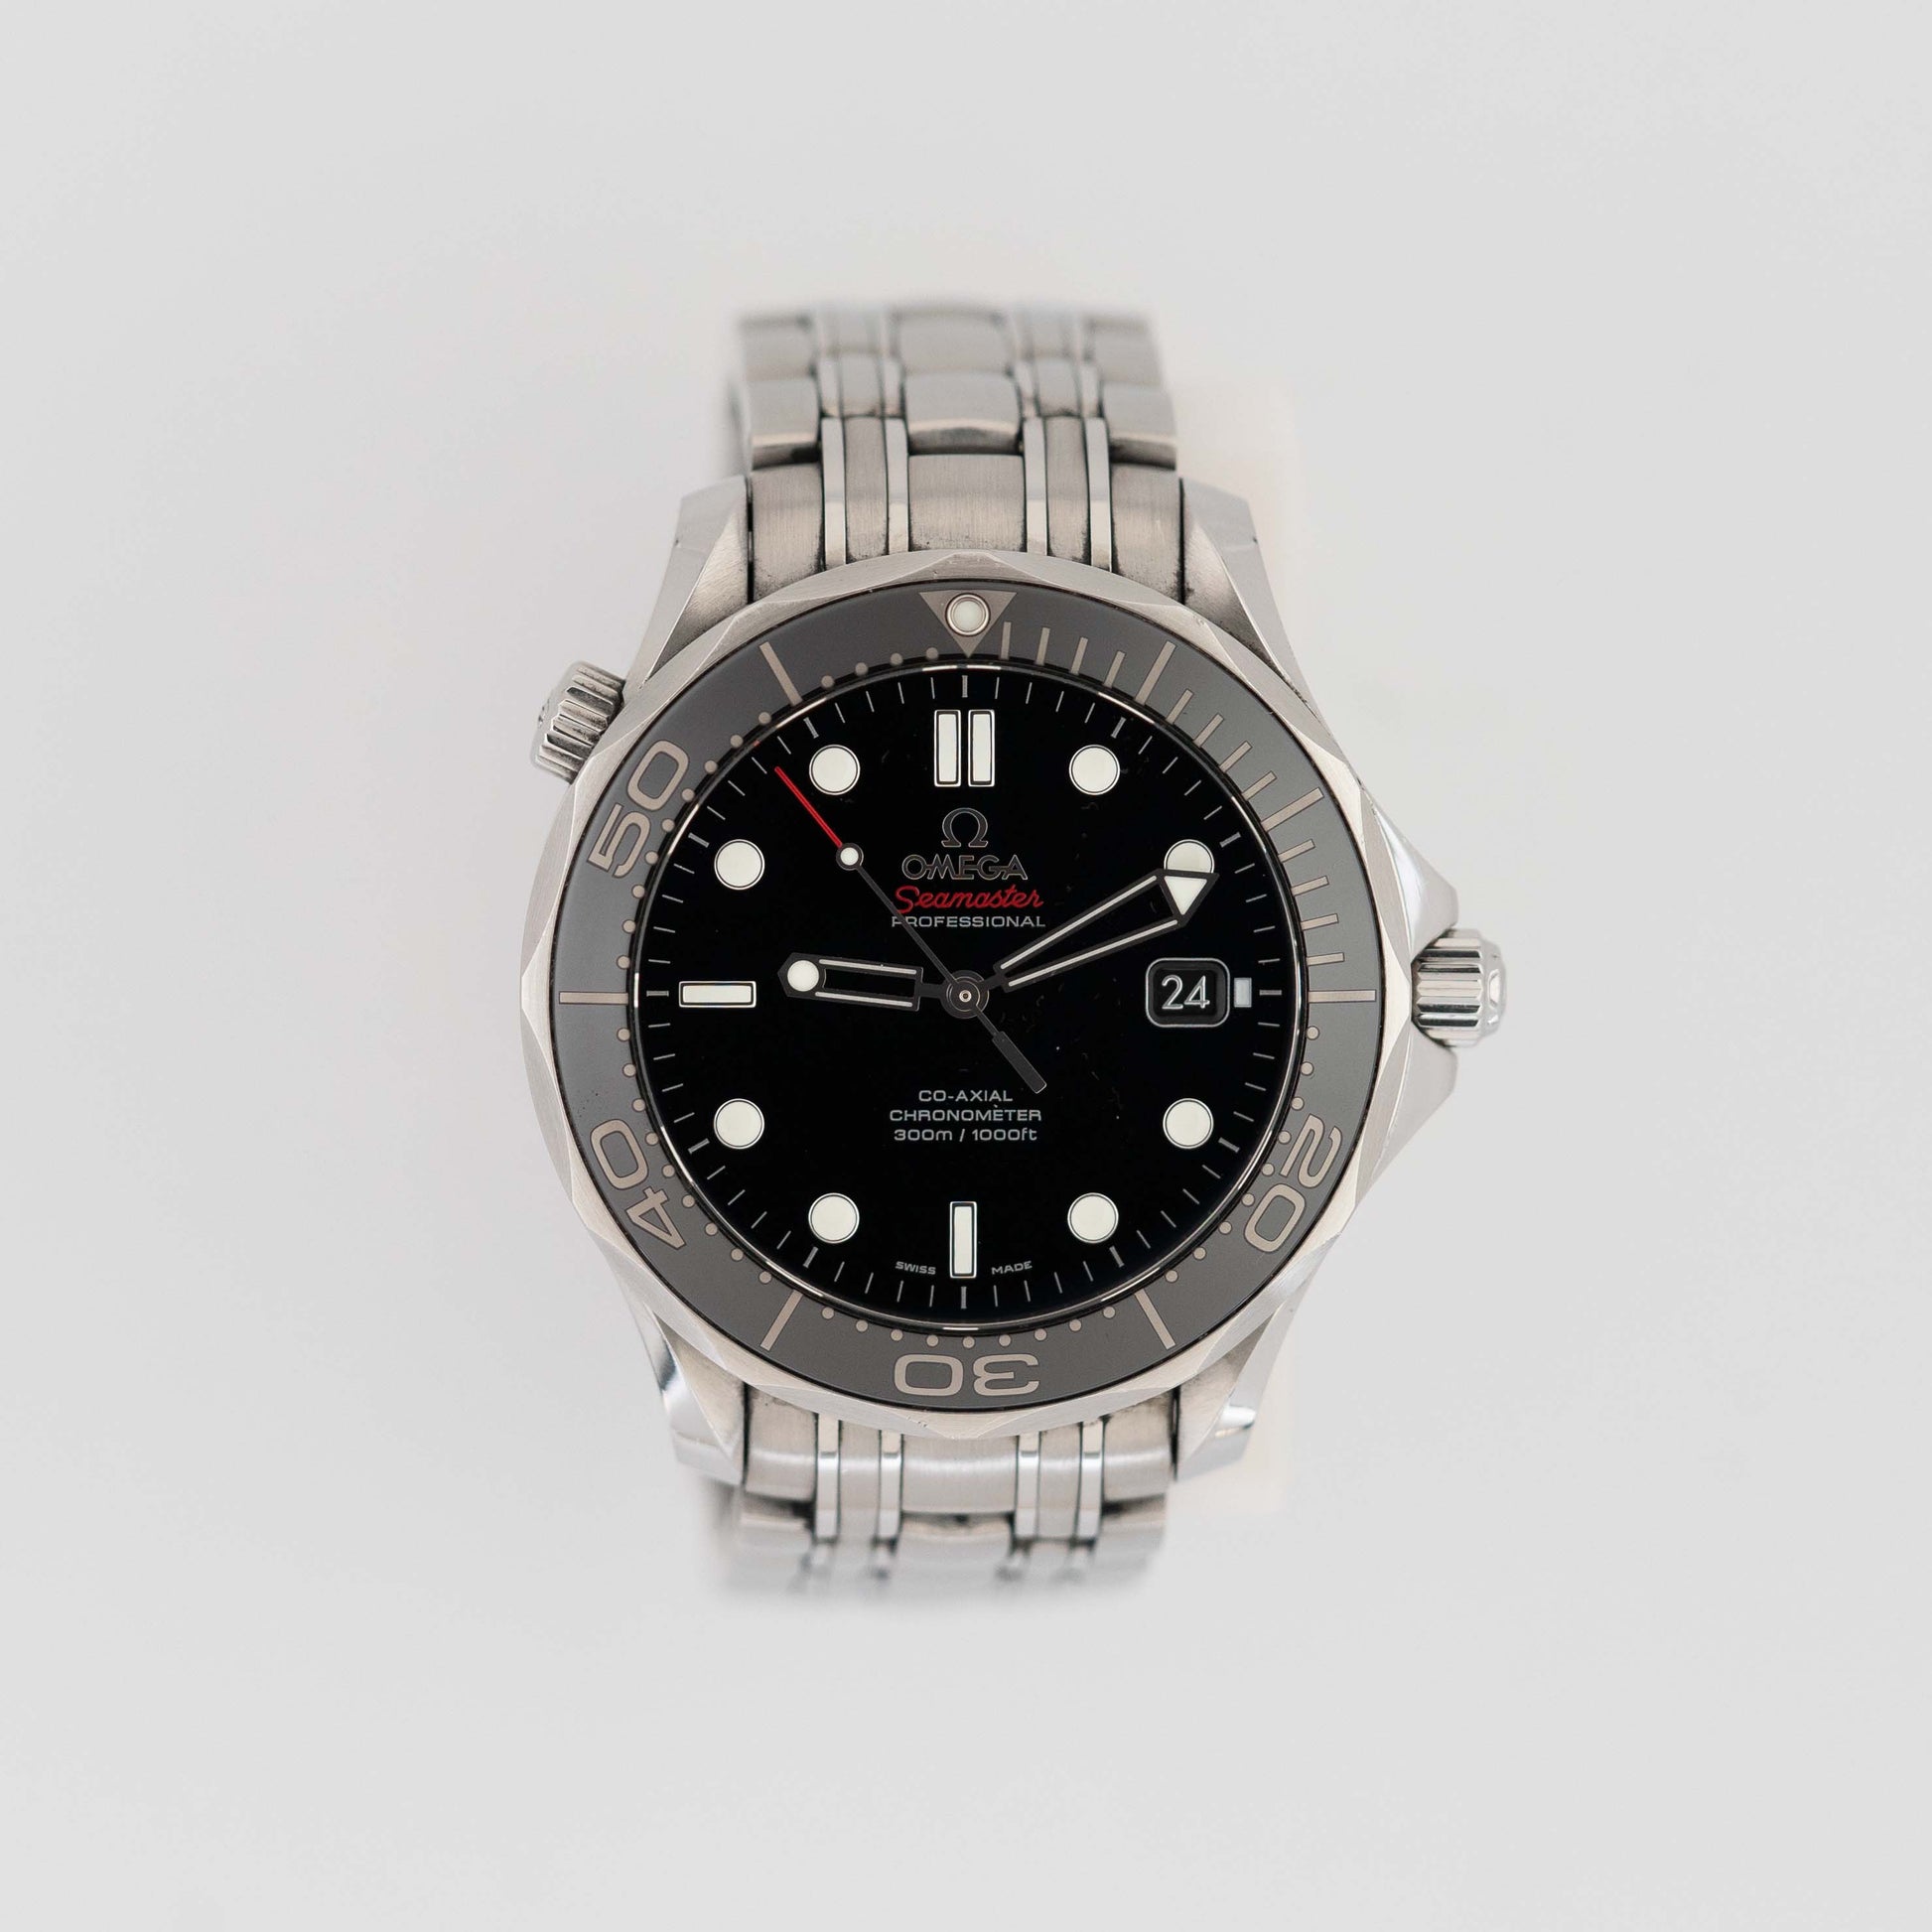 Dial of Omega Seamaster Diver 300m Co-Axial Chronometer 41mm